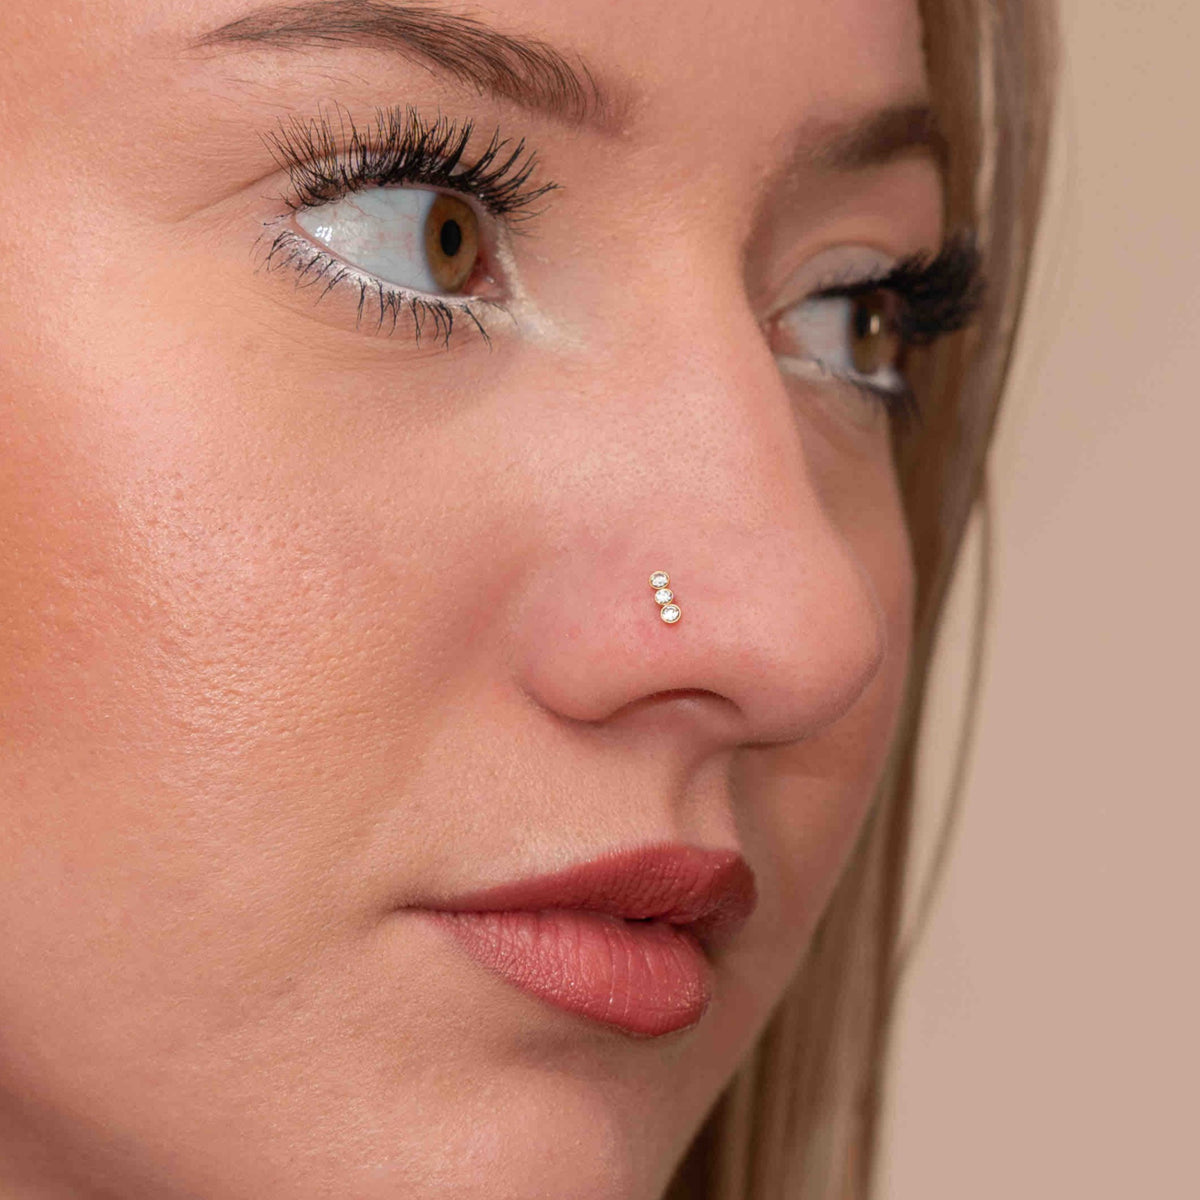 The Cindy nose piercing 